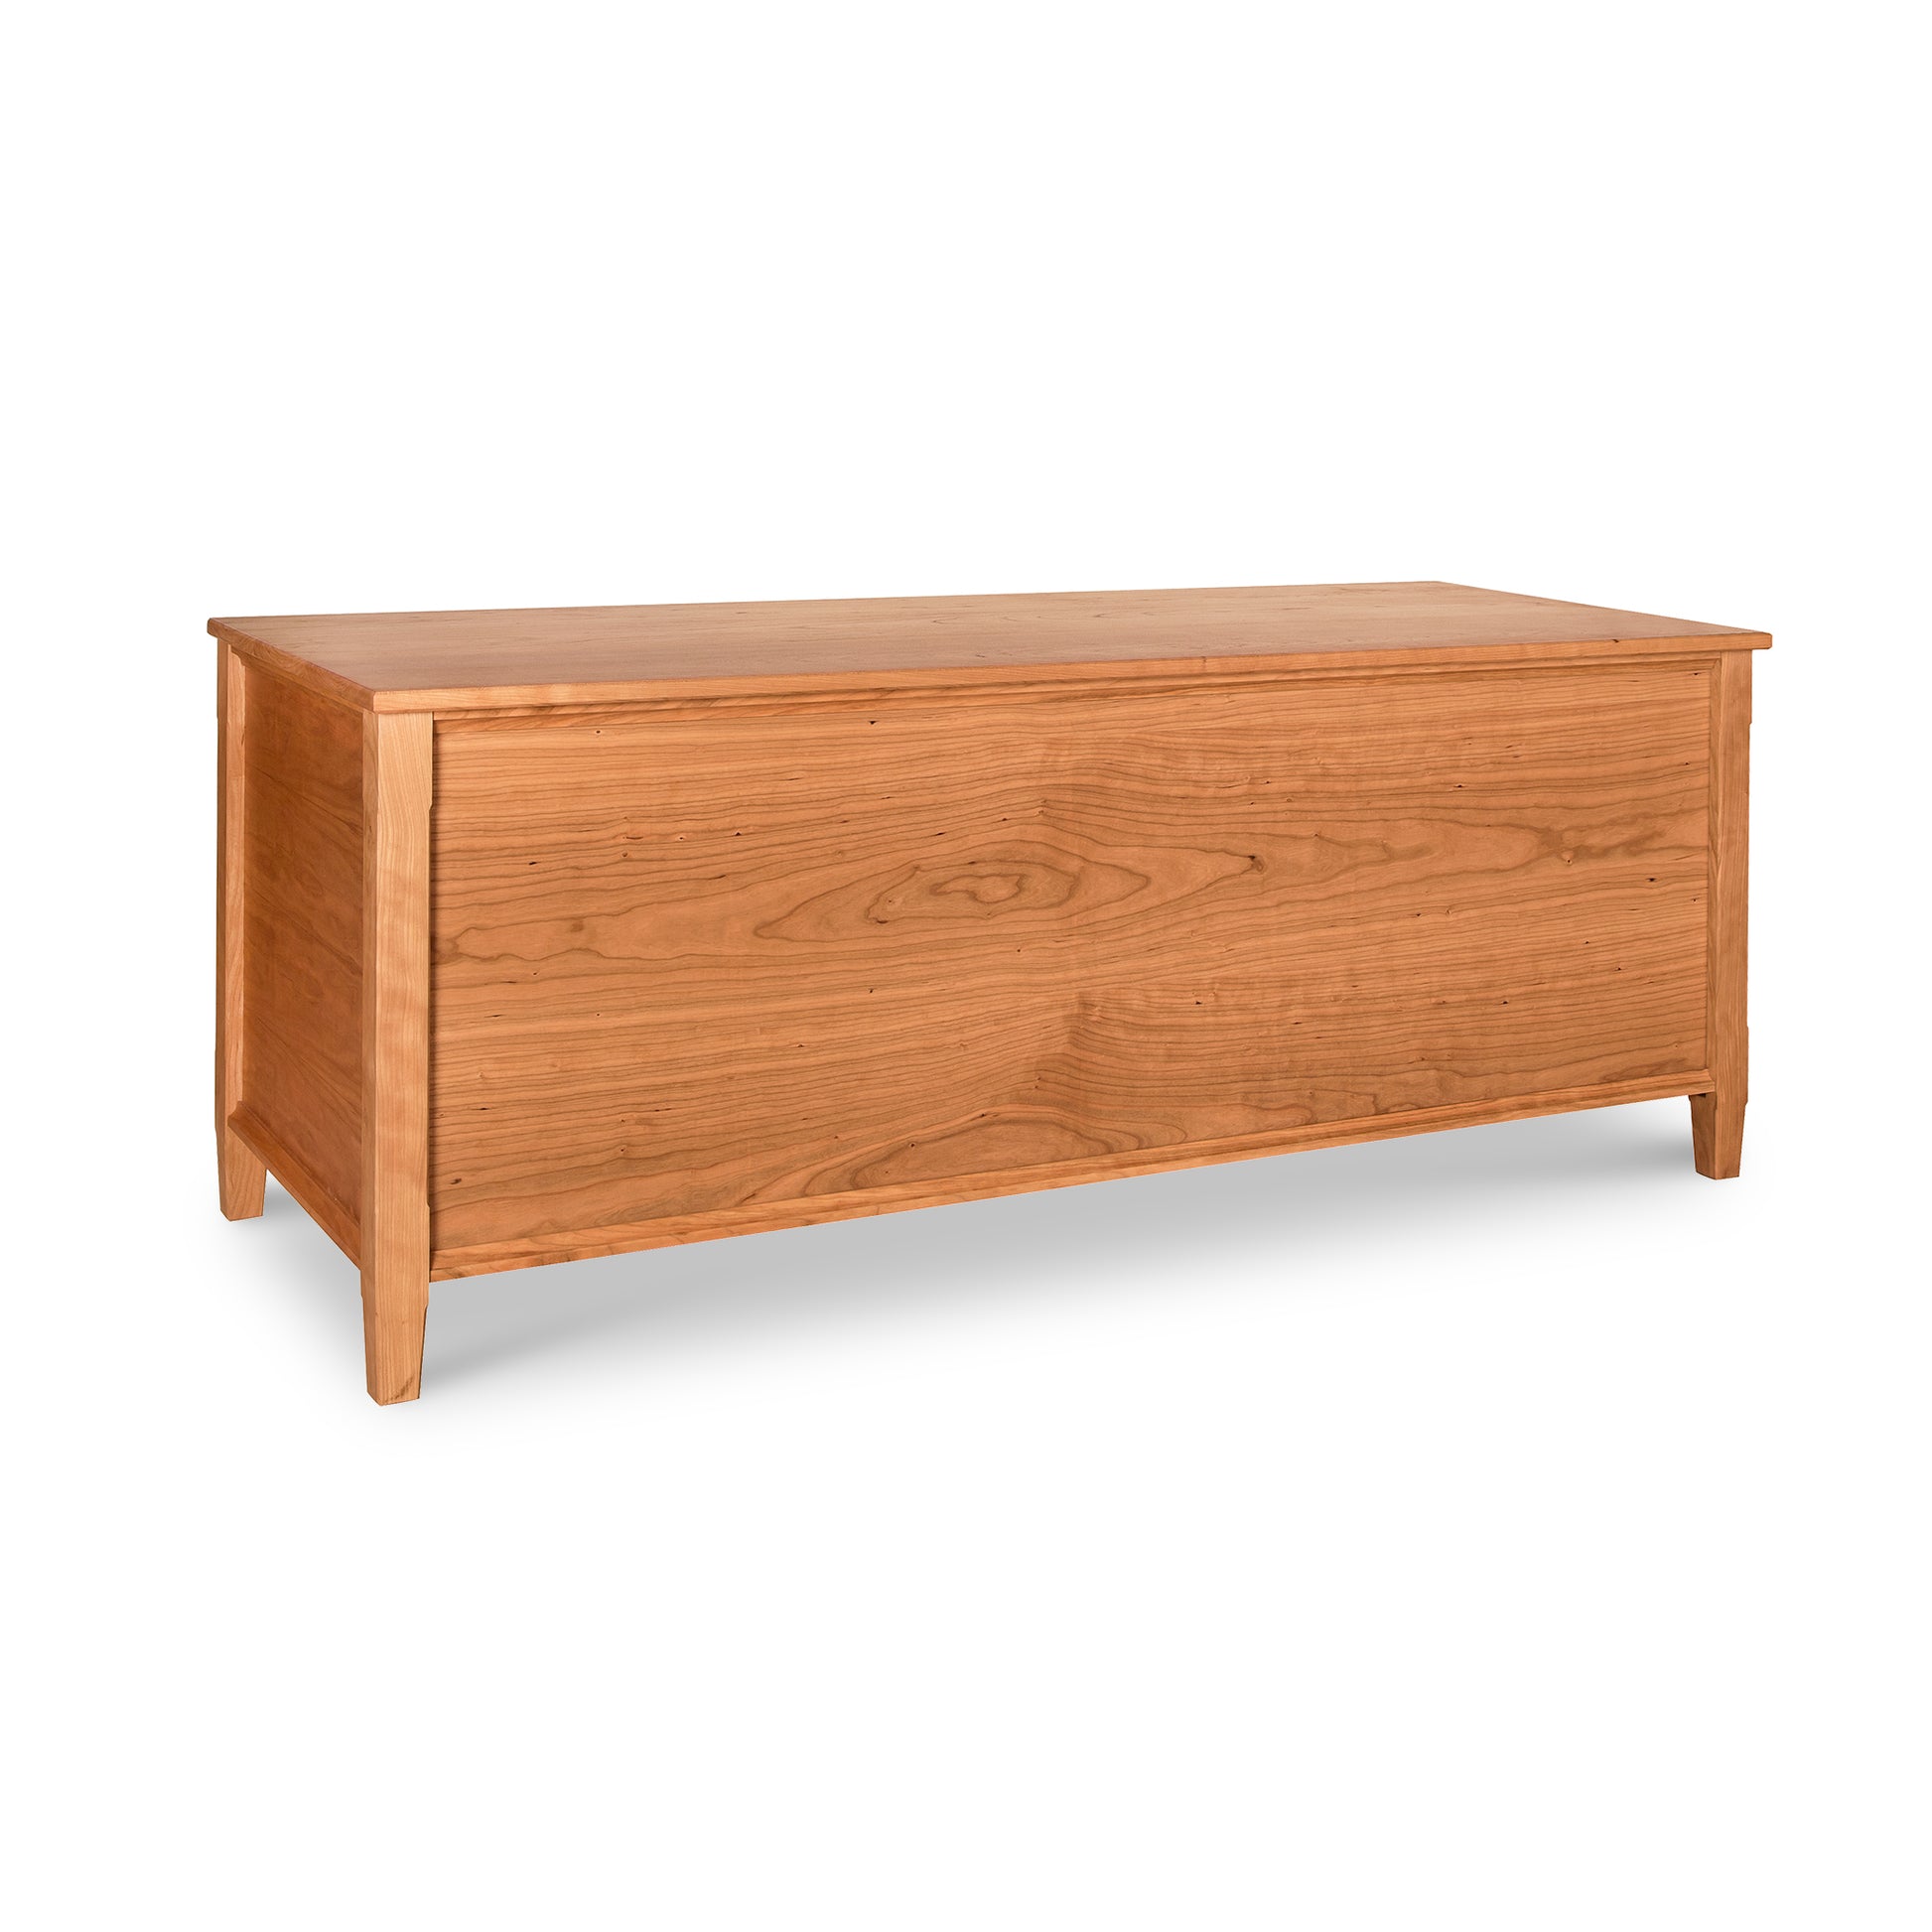 A Maple Corner Woodworks Vermont Shaker Blanket Chest crafted from light-colored, sustainably harvested woods, featuring a hinged top and standing isolated against a white background.